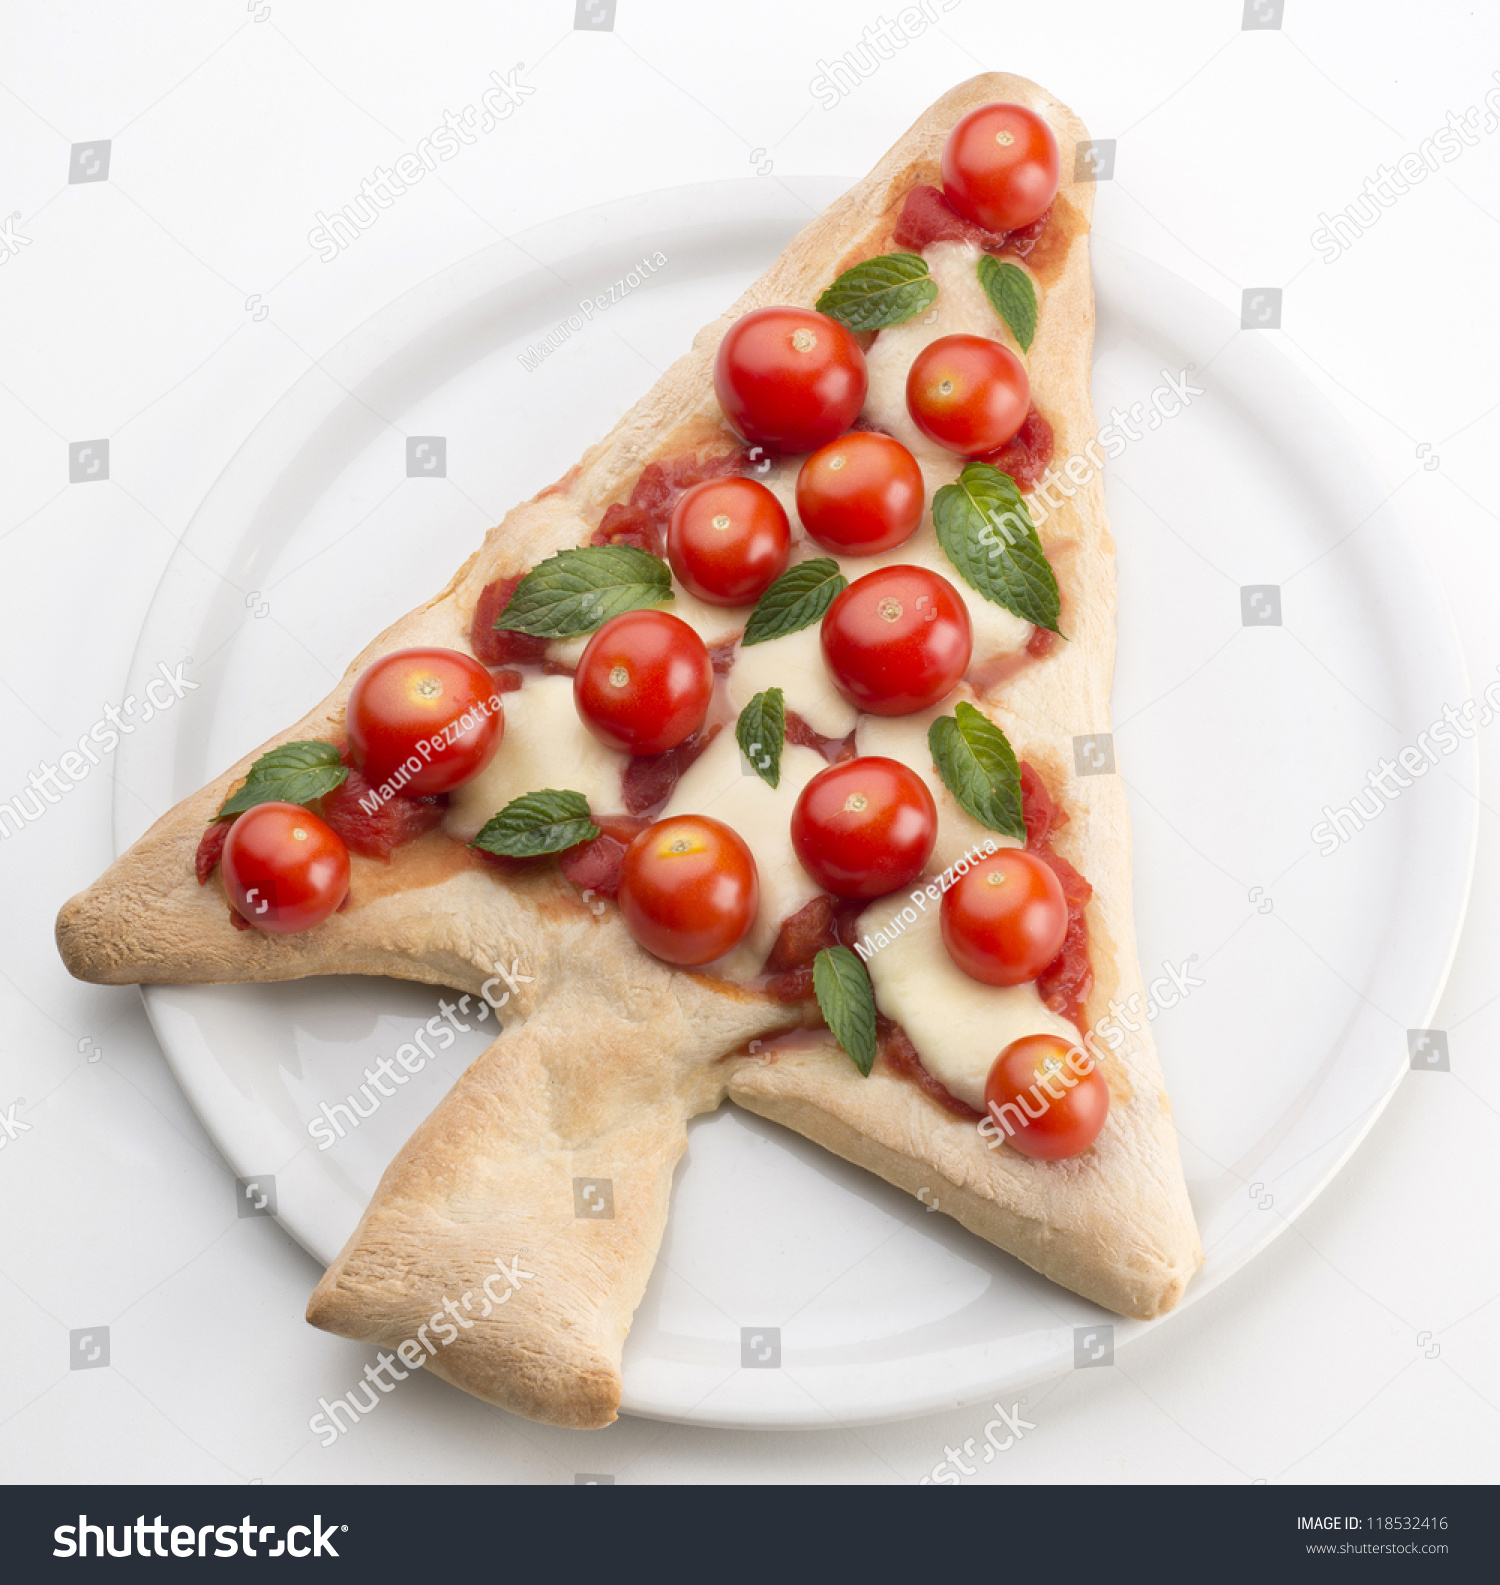 stock-photo-pizza-in-the-shape-of-christmas-tree-118532416.jpg